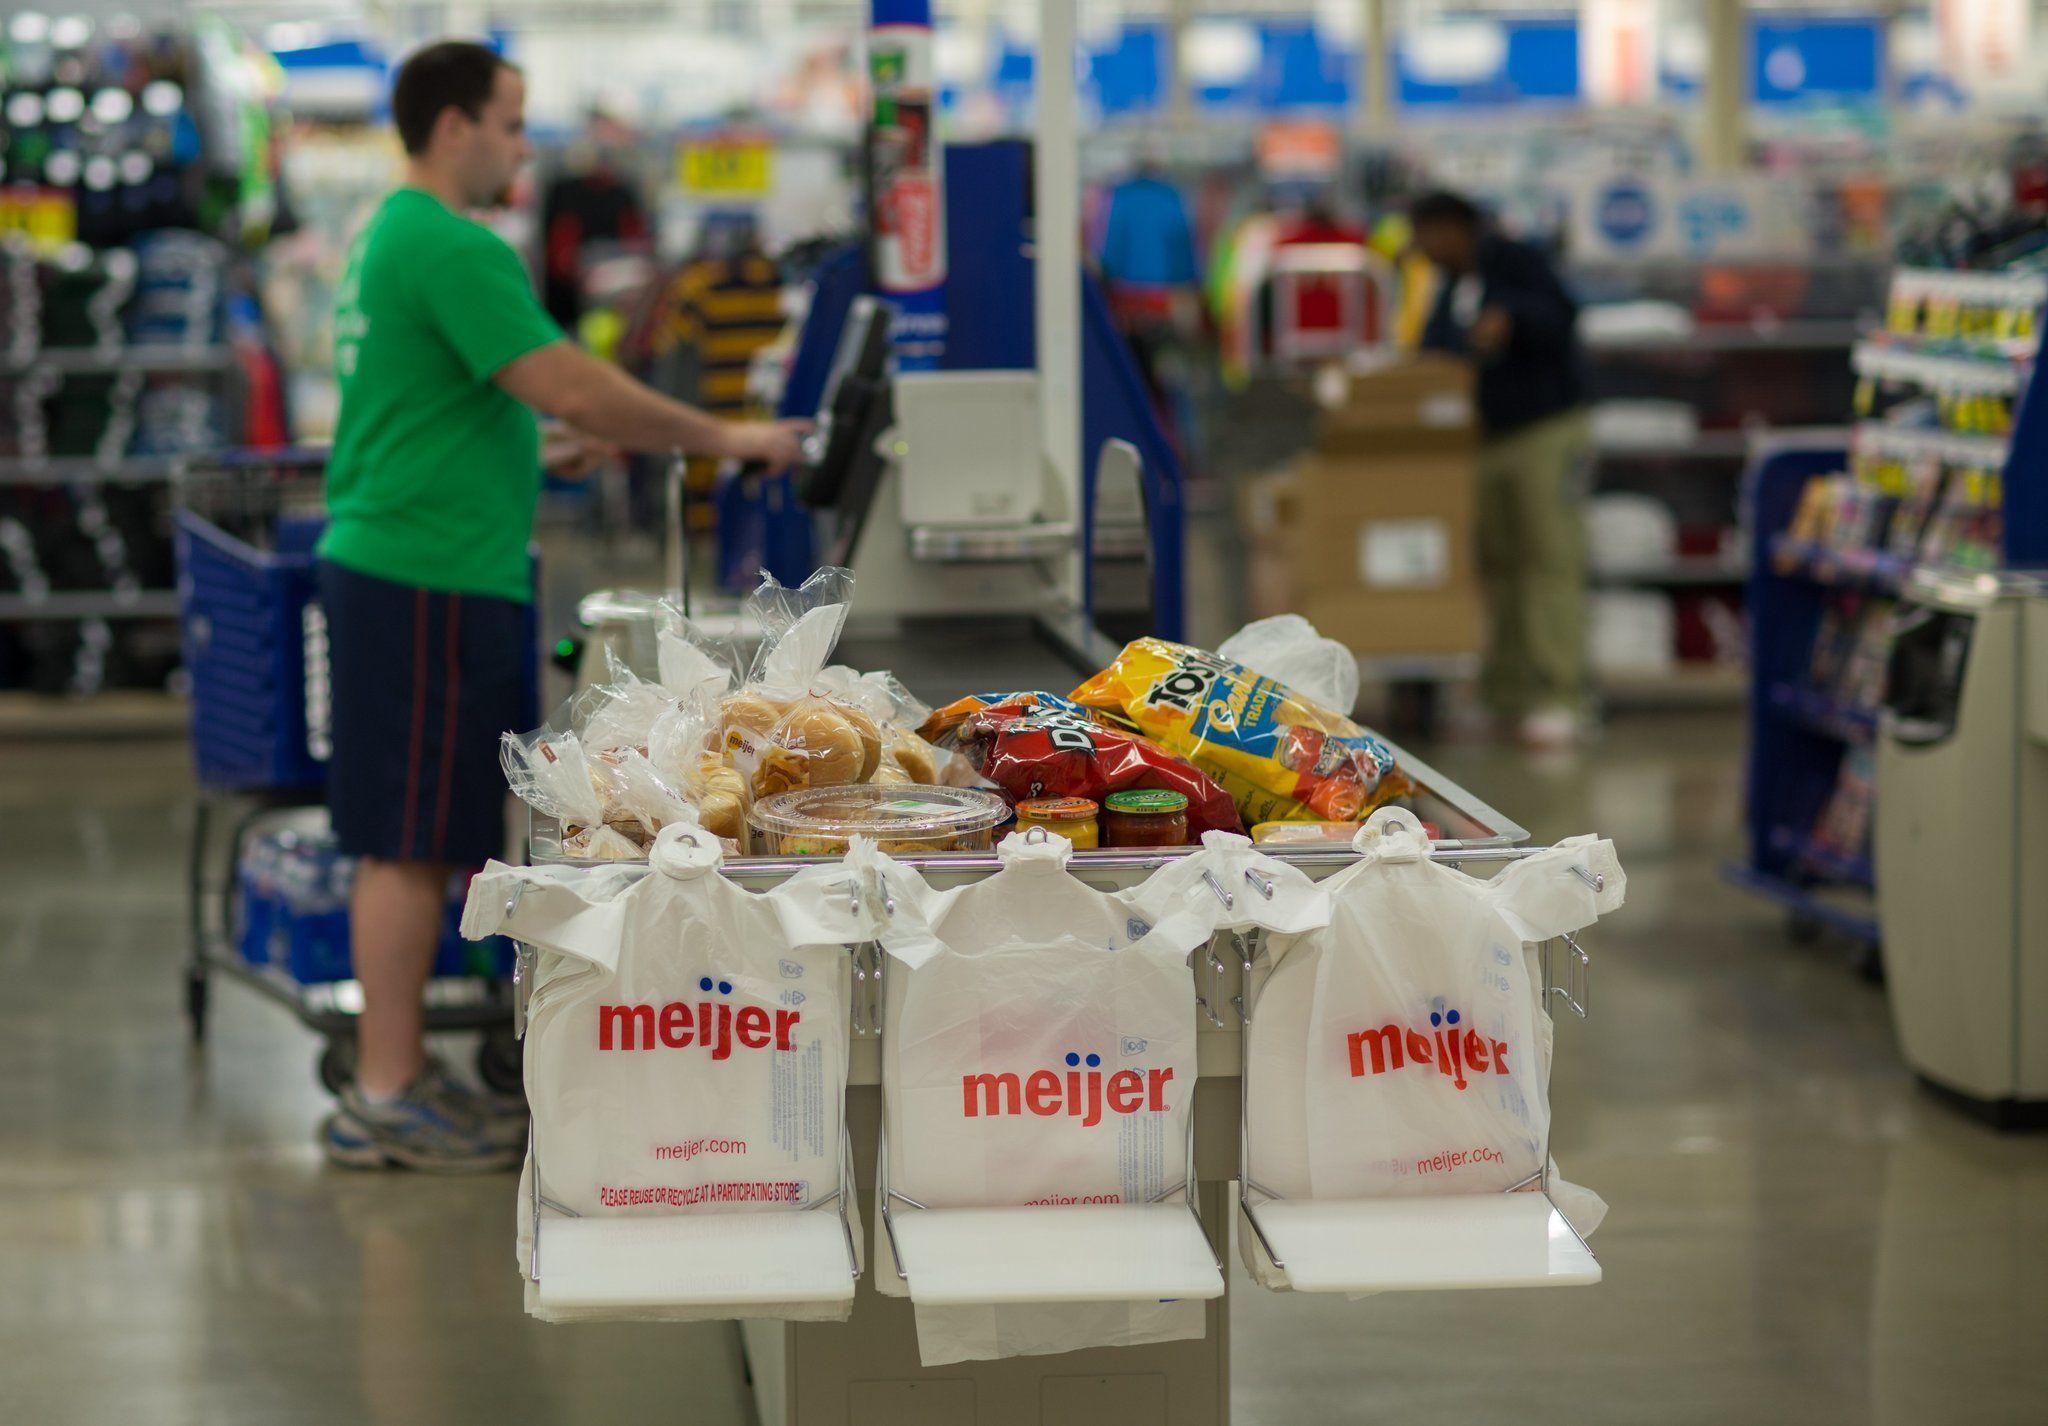 Meijer Grocery Logo - Meijer to close two Chicago-area stores - Chicago Tribune